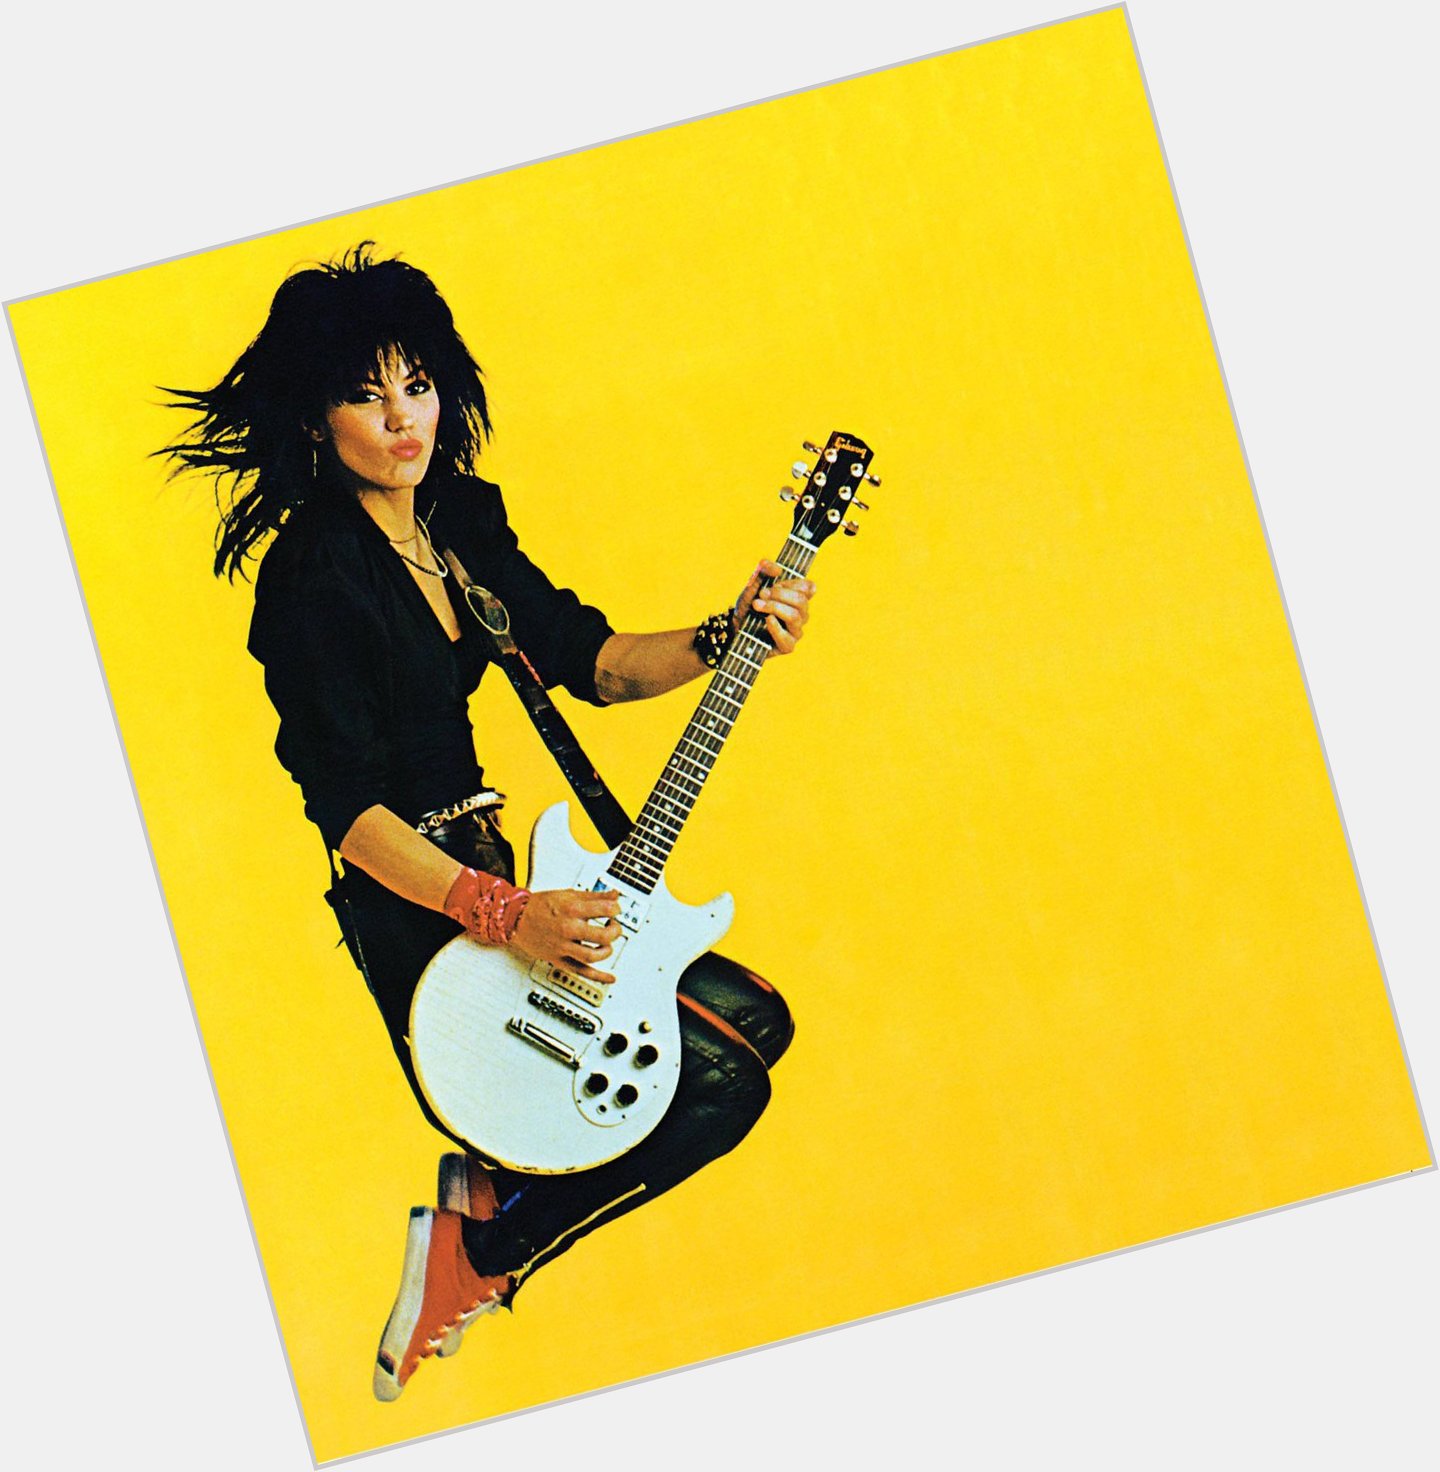 A big SHOUT out to the queen - Happy birthday to the one & only Joan Jett!!! 